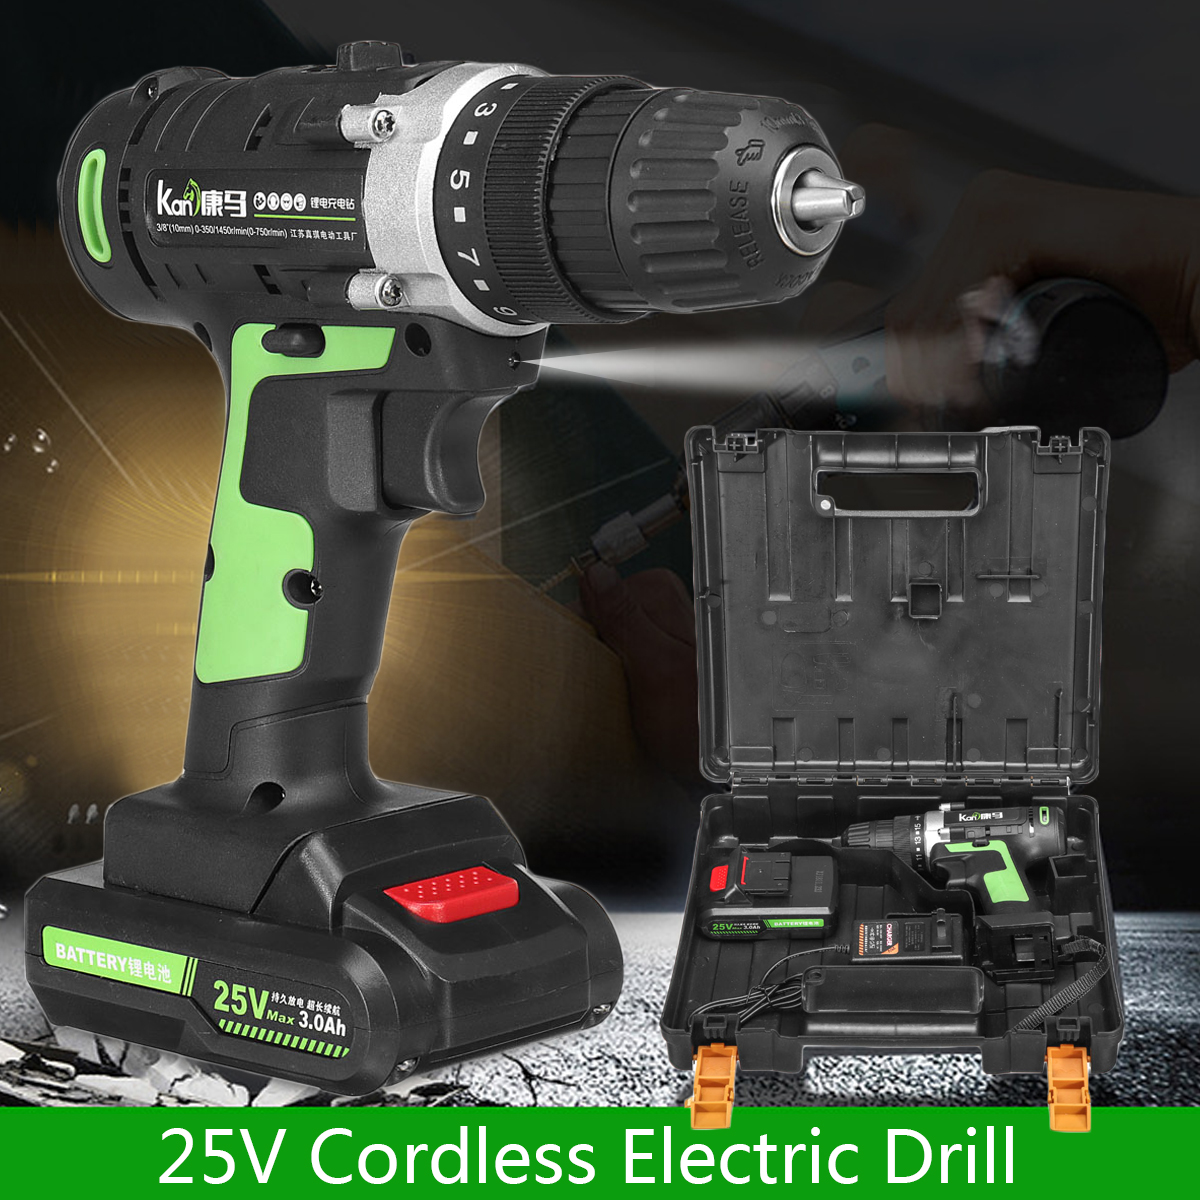 25V-Electric-Screwdriver-30Ah-Li-ion-Battery-Rechargeable-Cordless-Drill-2-Speed-1400630-6